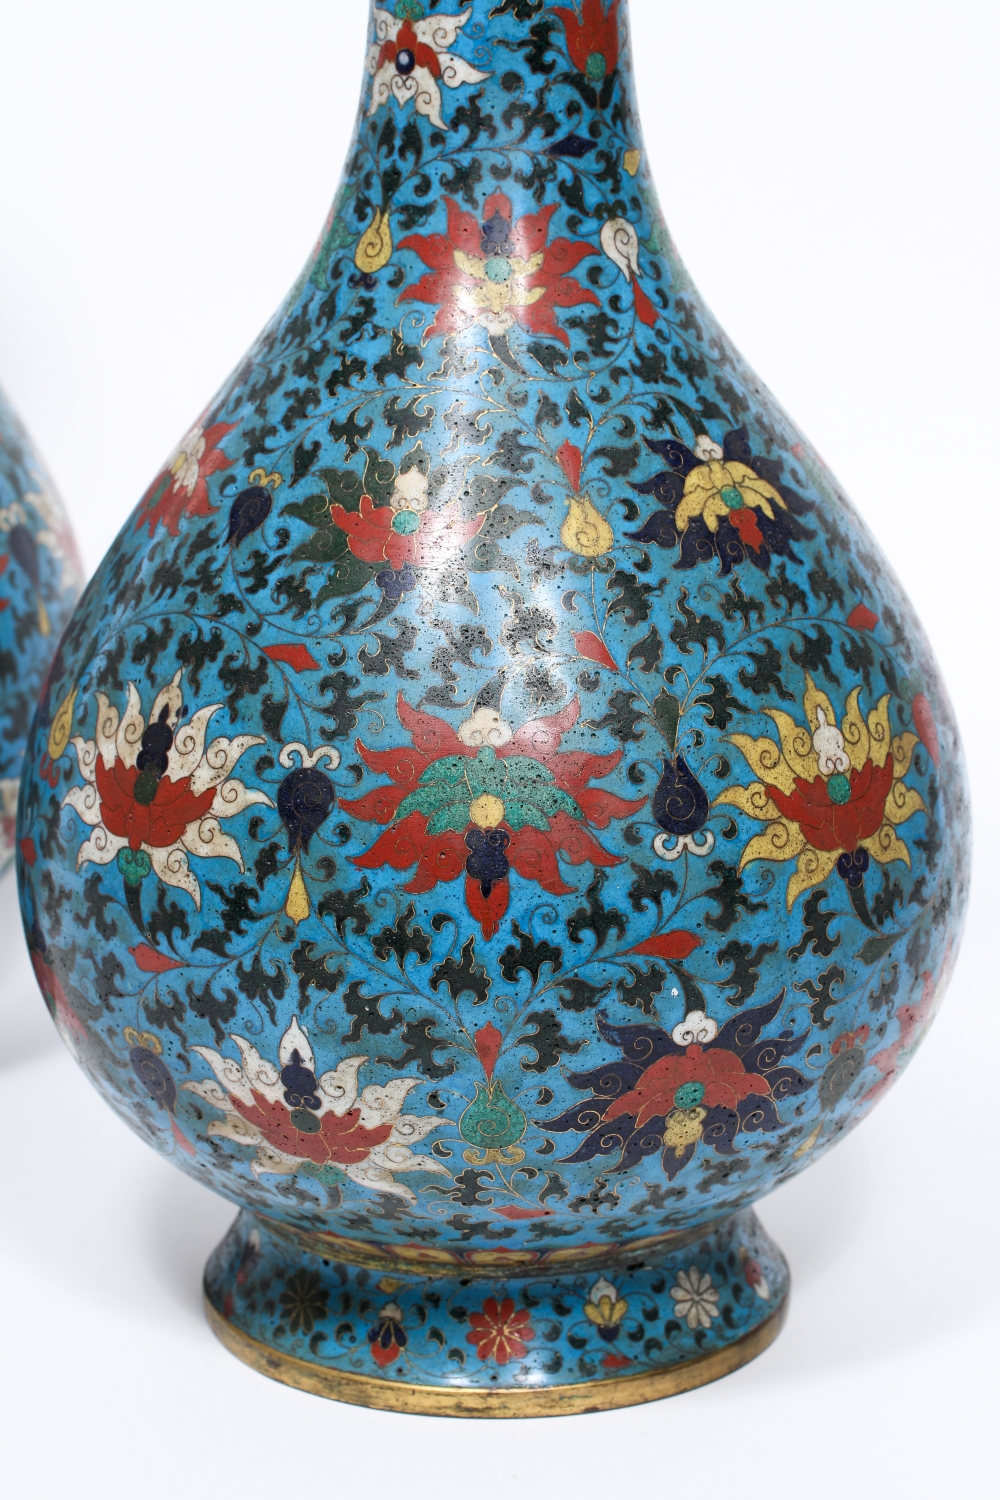 A pair of large cloisonné enamel pear-shaped bottle vases (Qing dynasty, 18th-19th century)